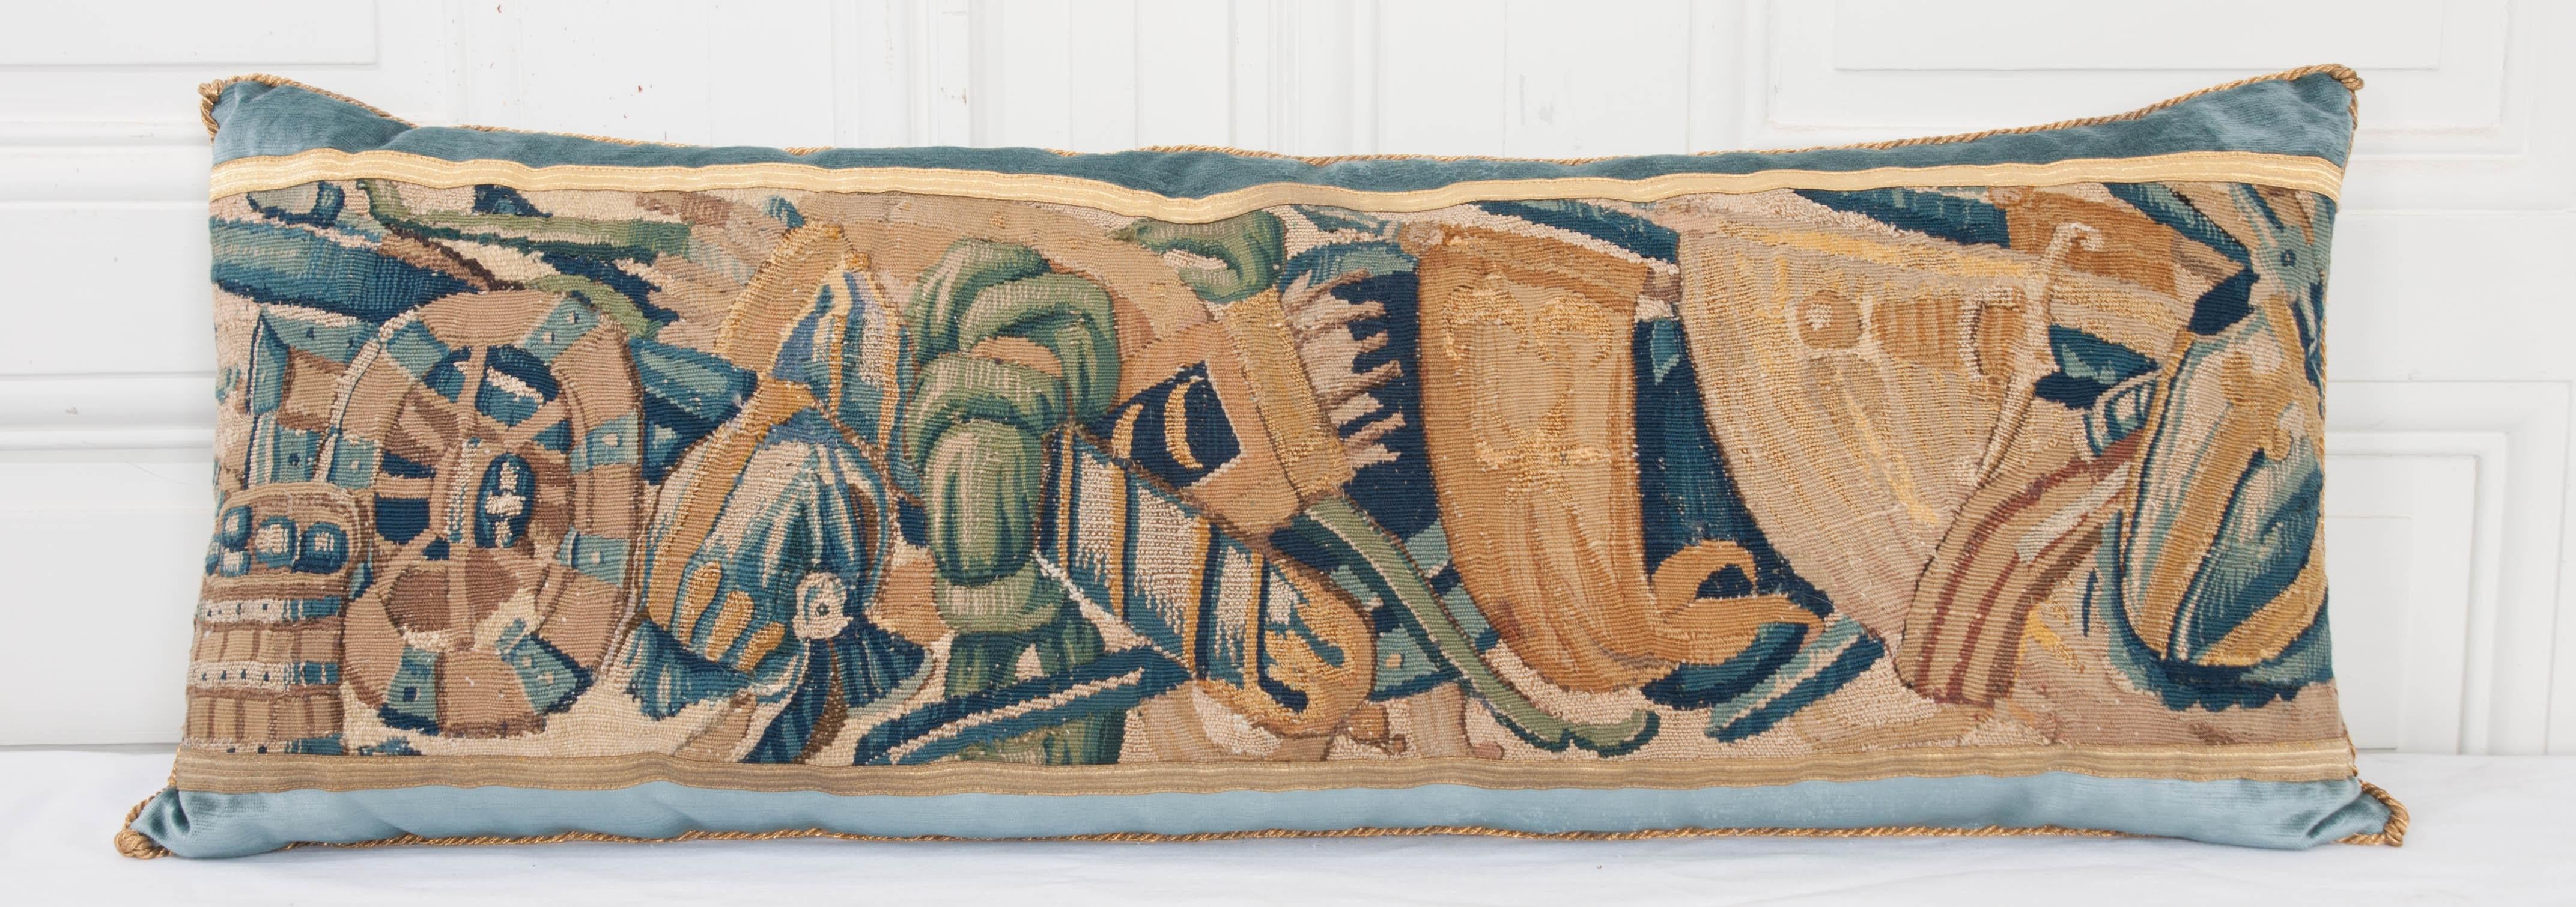 17th century tapestry fragment depicting a soldier’s gear in shades of blues, creams, greens and gold, bordered with antique gold metallic galon on Wedgwood blue velvet. Hand trimmed with vintage gold metallic cording, knotted in the corners. Down